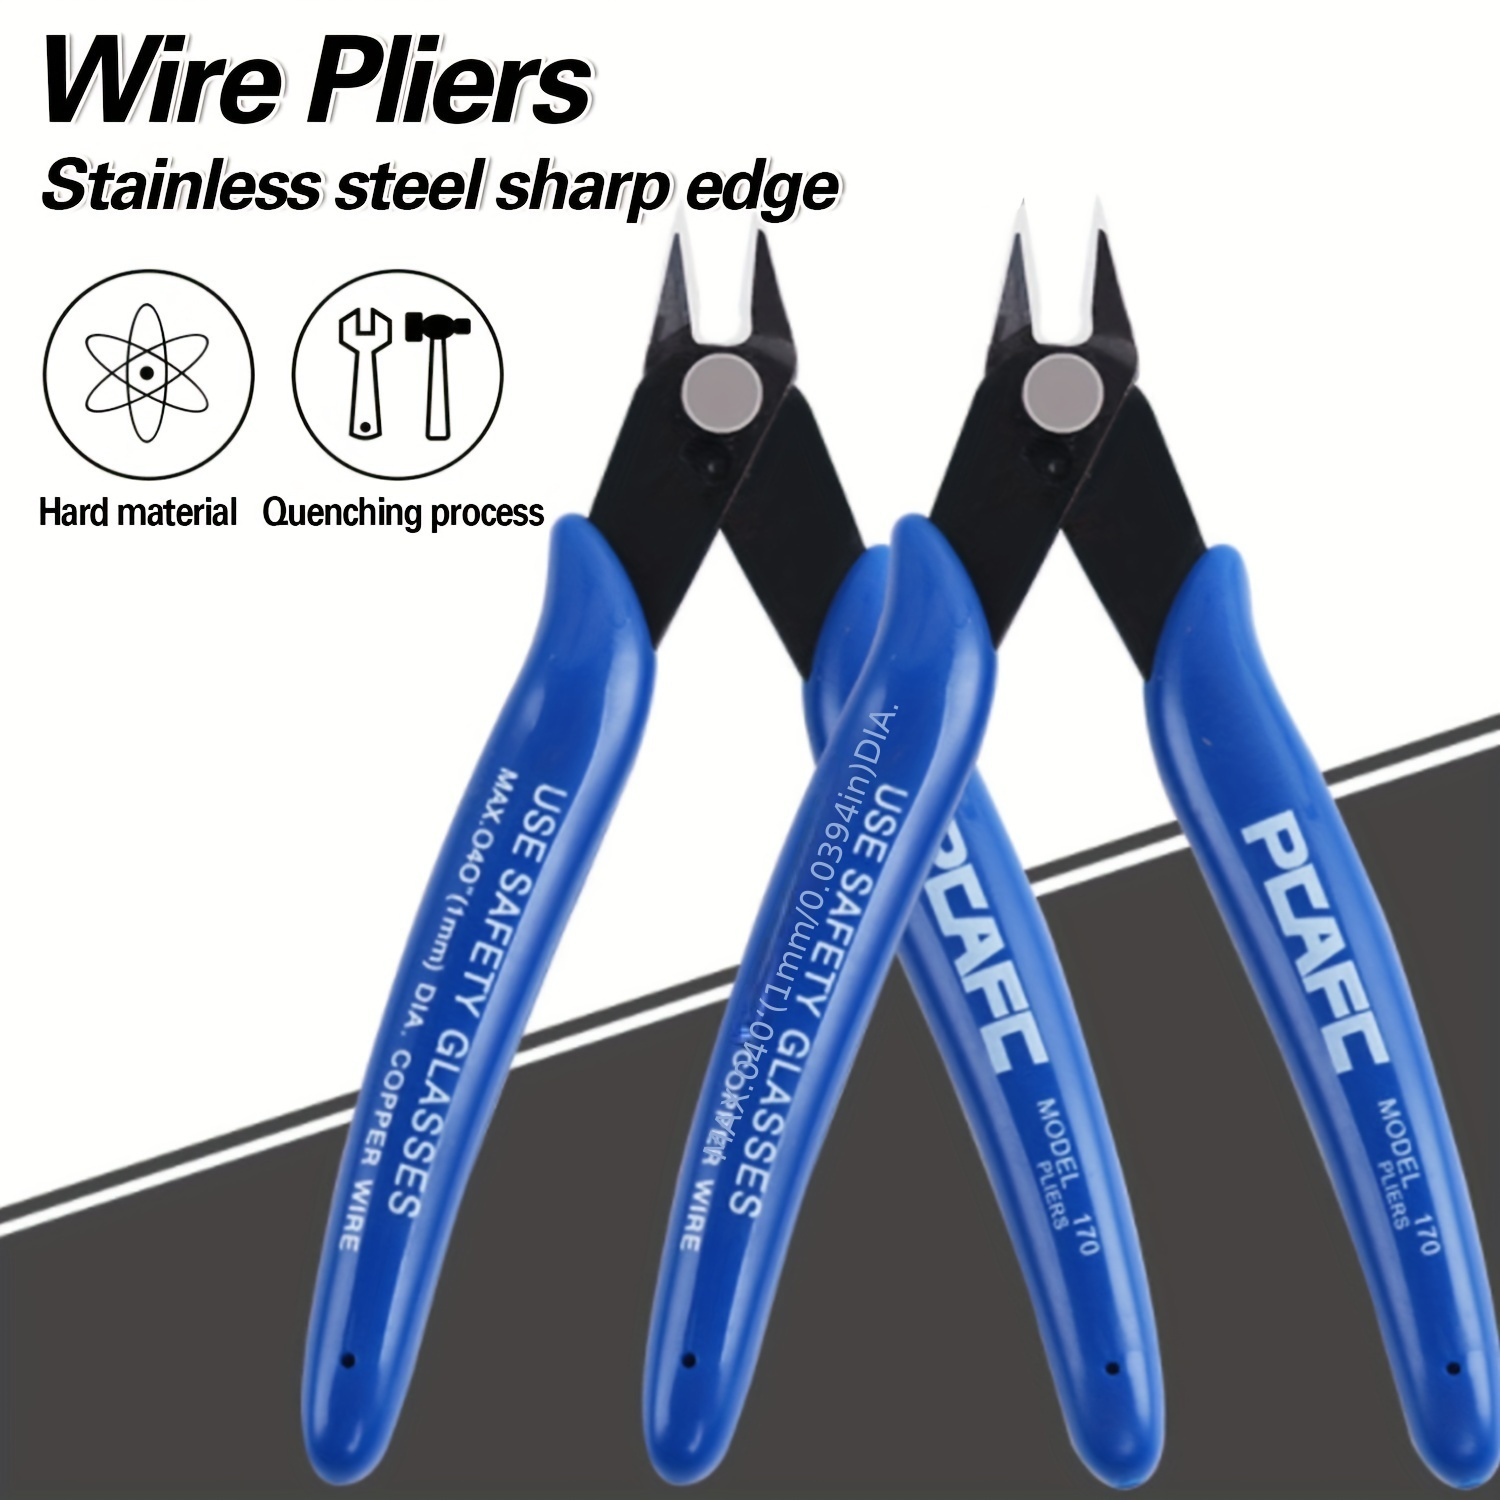 Electrical wire cutters